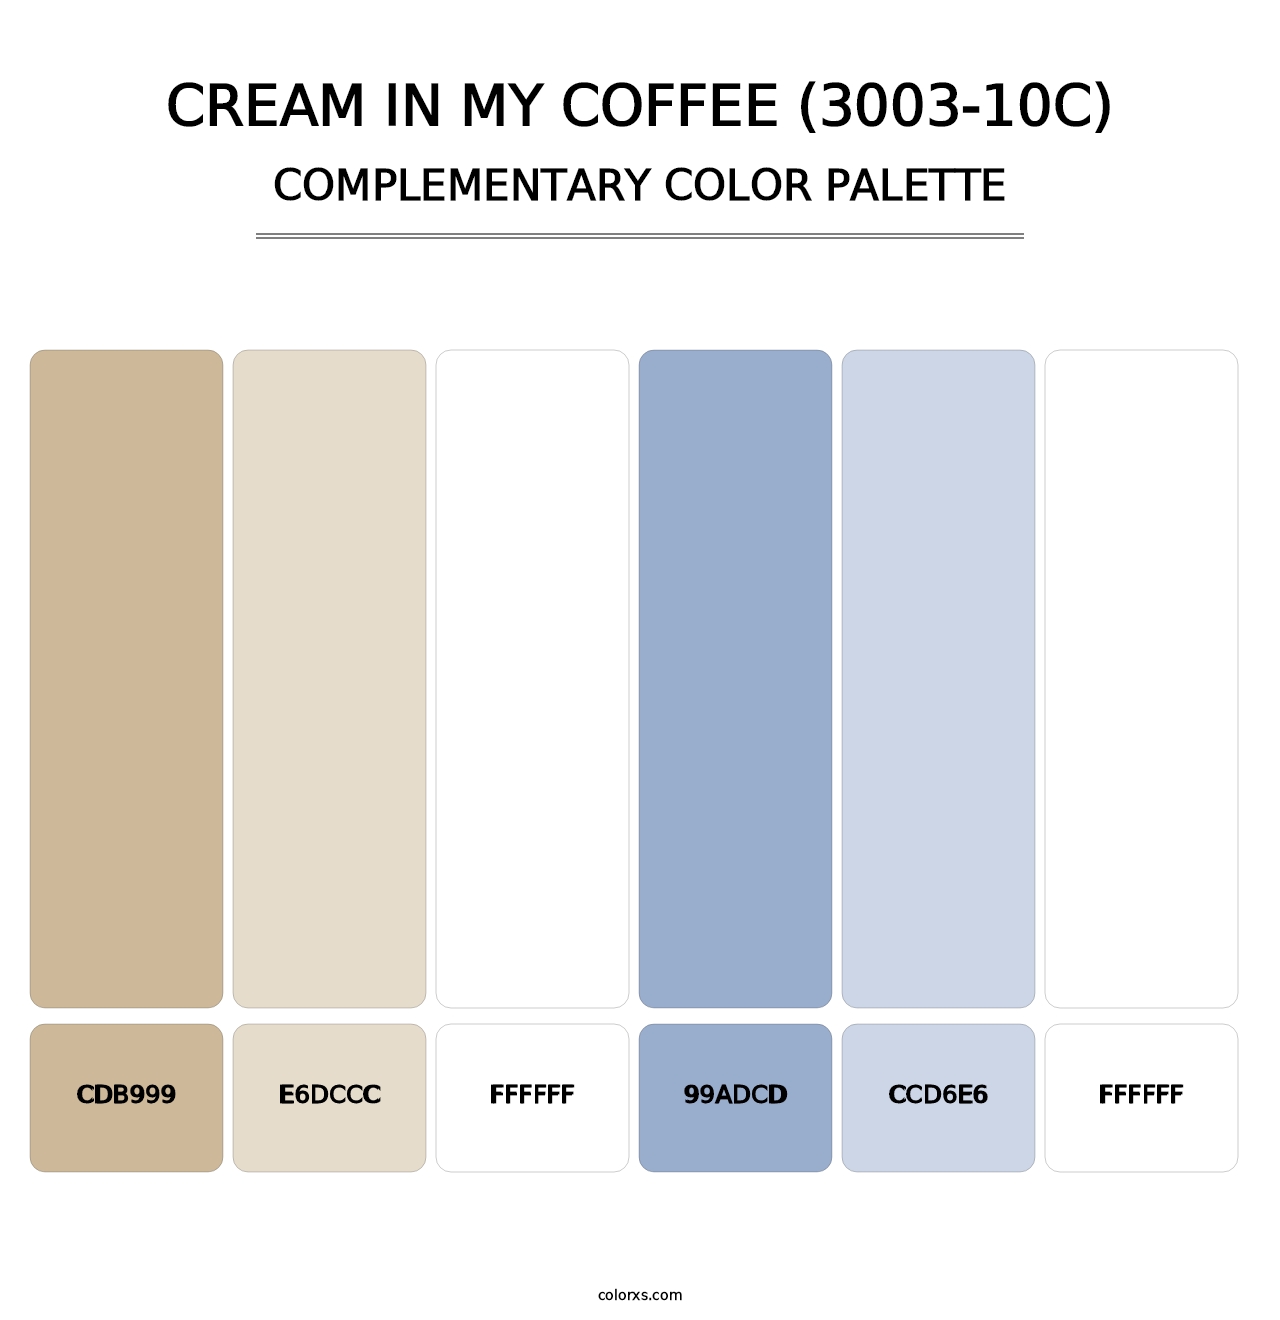 Cream in My Coffee (3003-10C) - Complementary Color Palette